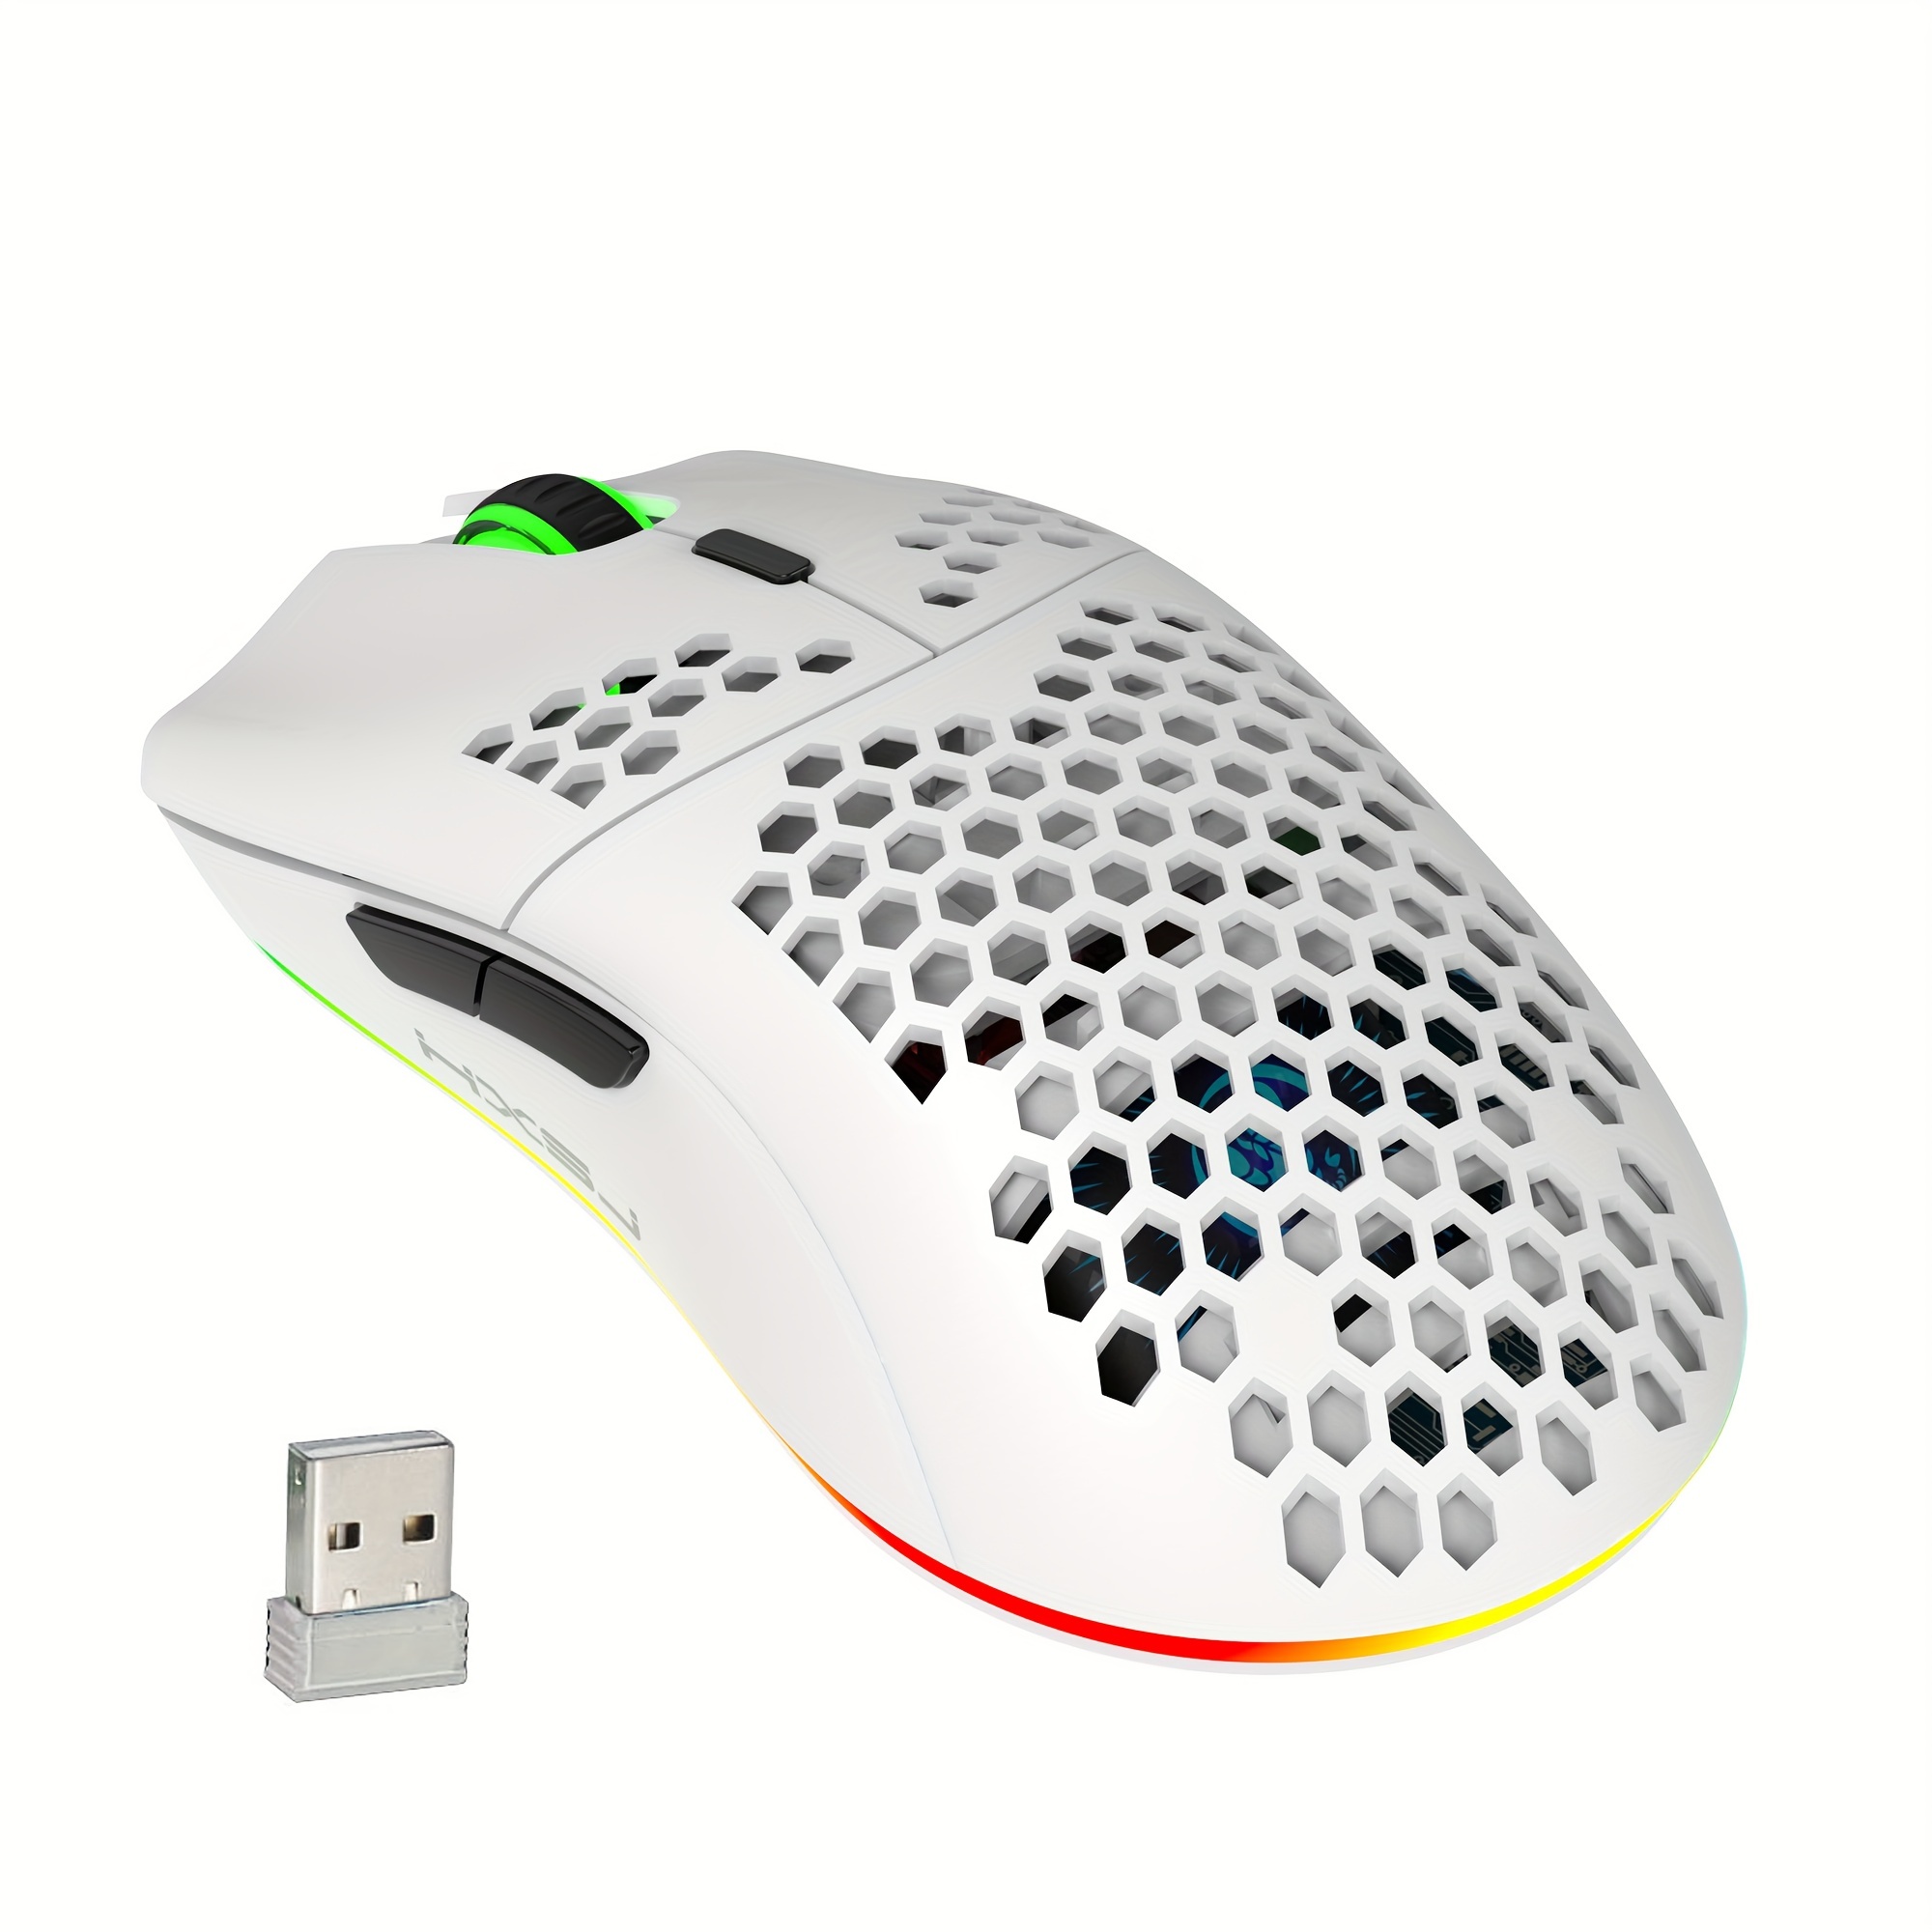 RGB Wireless Gaming Mouse,Ultra-Lightweight Honeycomb Shell Mice with 2.4G  Wireless Rechargeable,RGB Spectrum Backlit,7 Buttons,3200DPI,Ergonomic Long